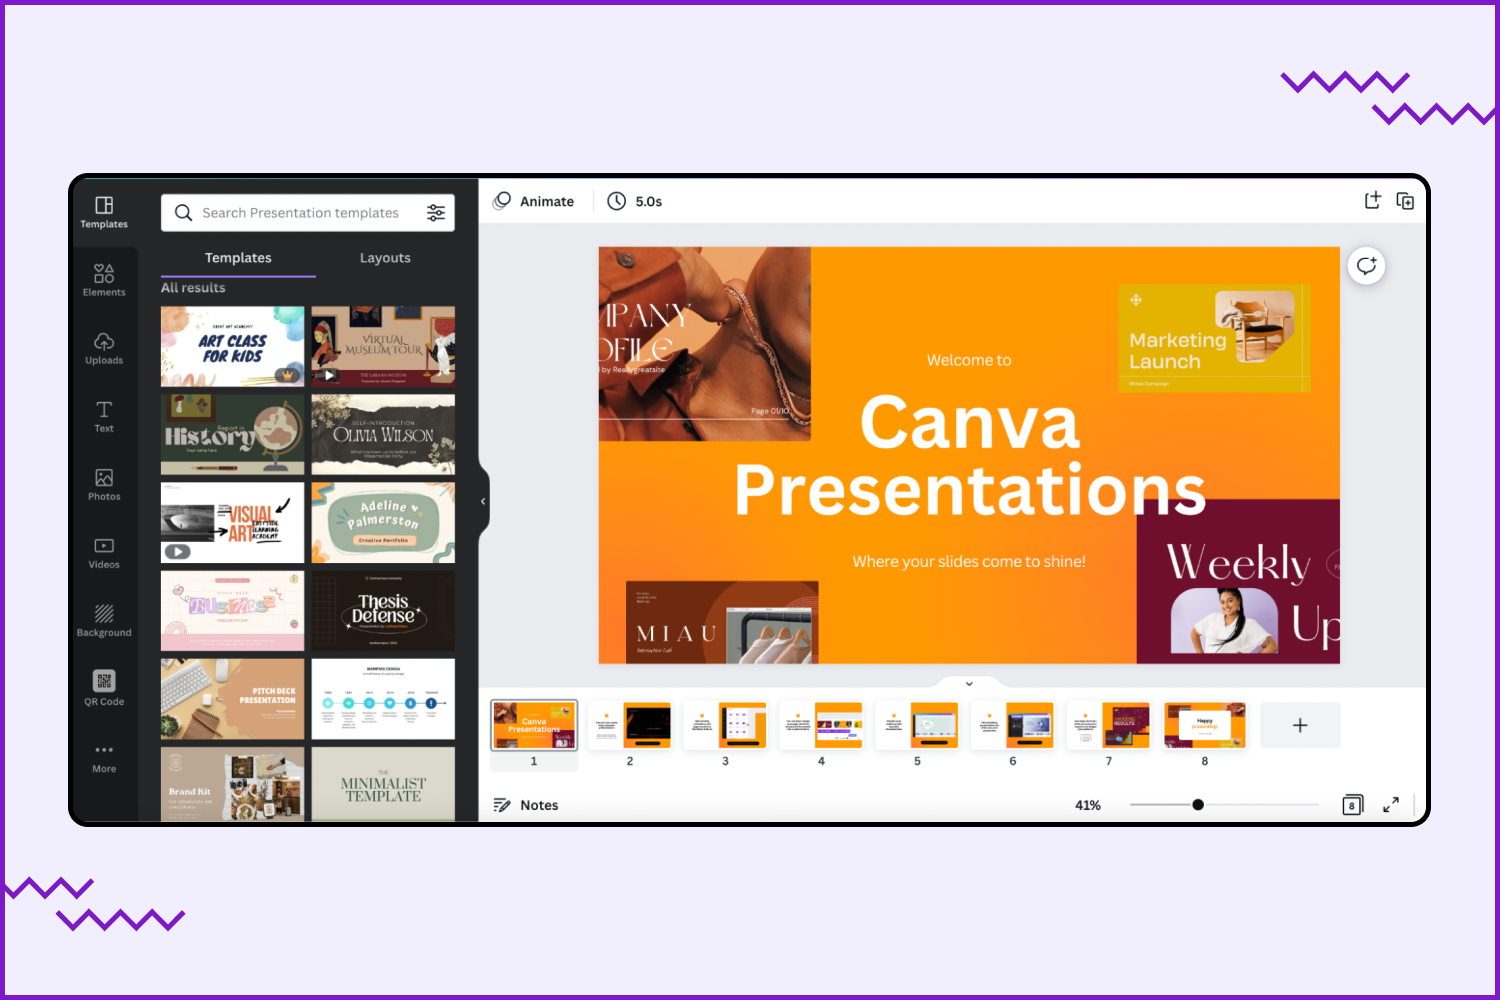 Screenshot of the working window of the Canva website and the presentation window.